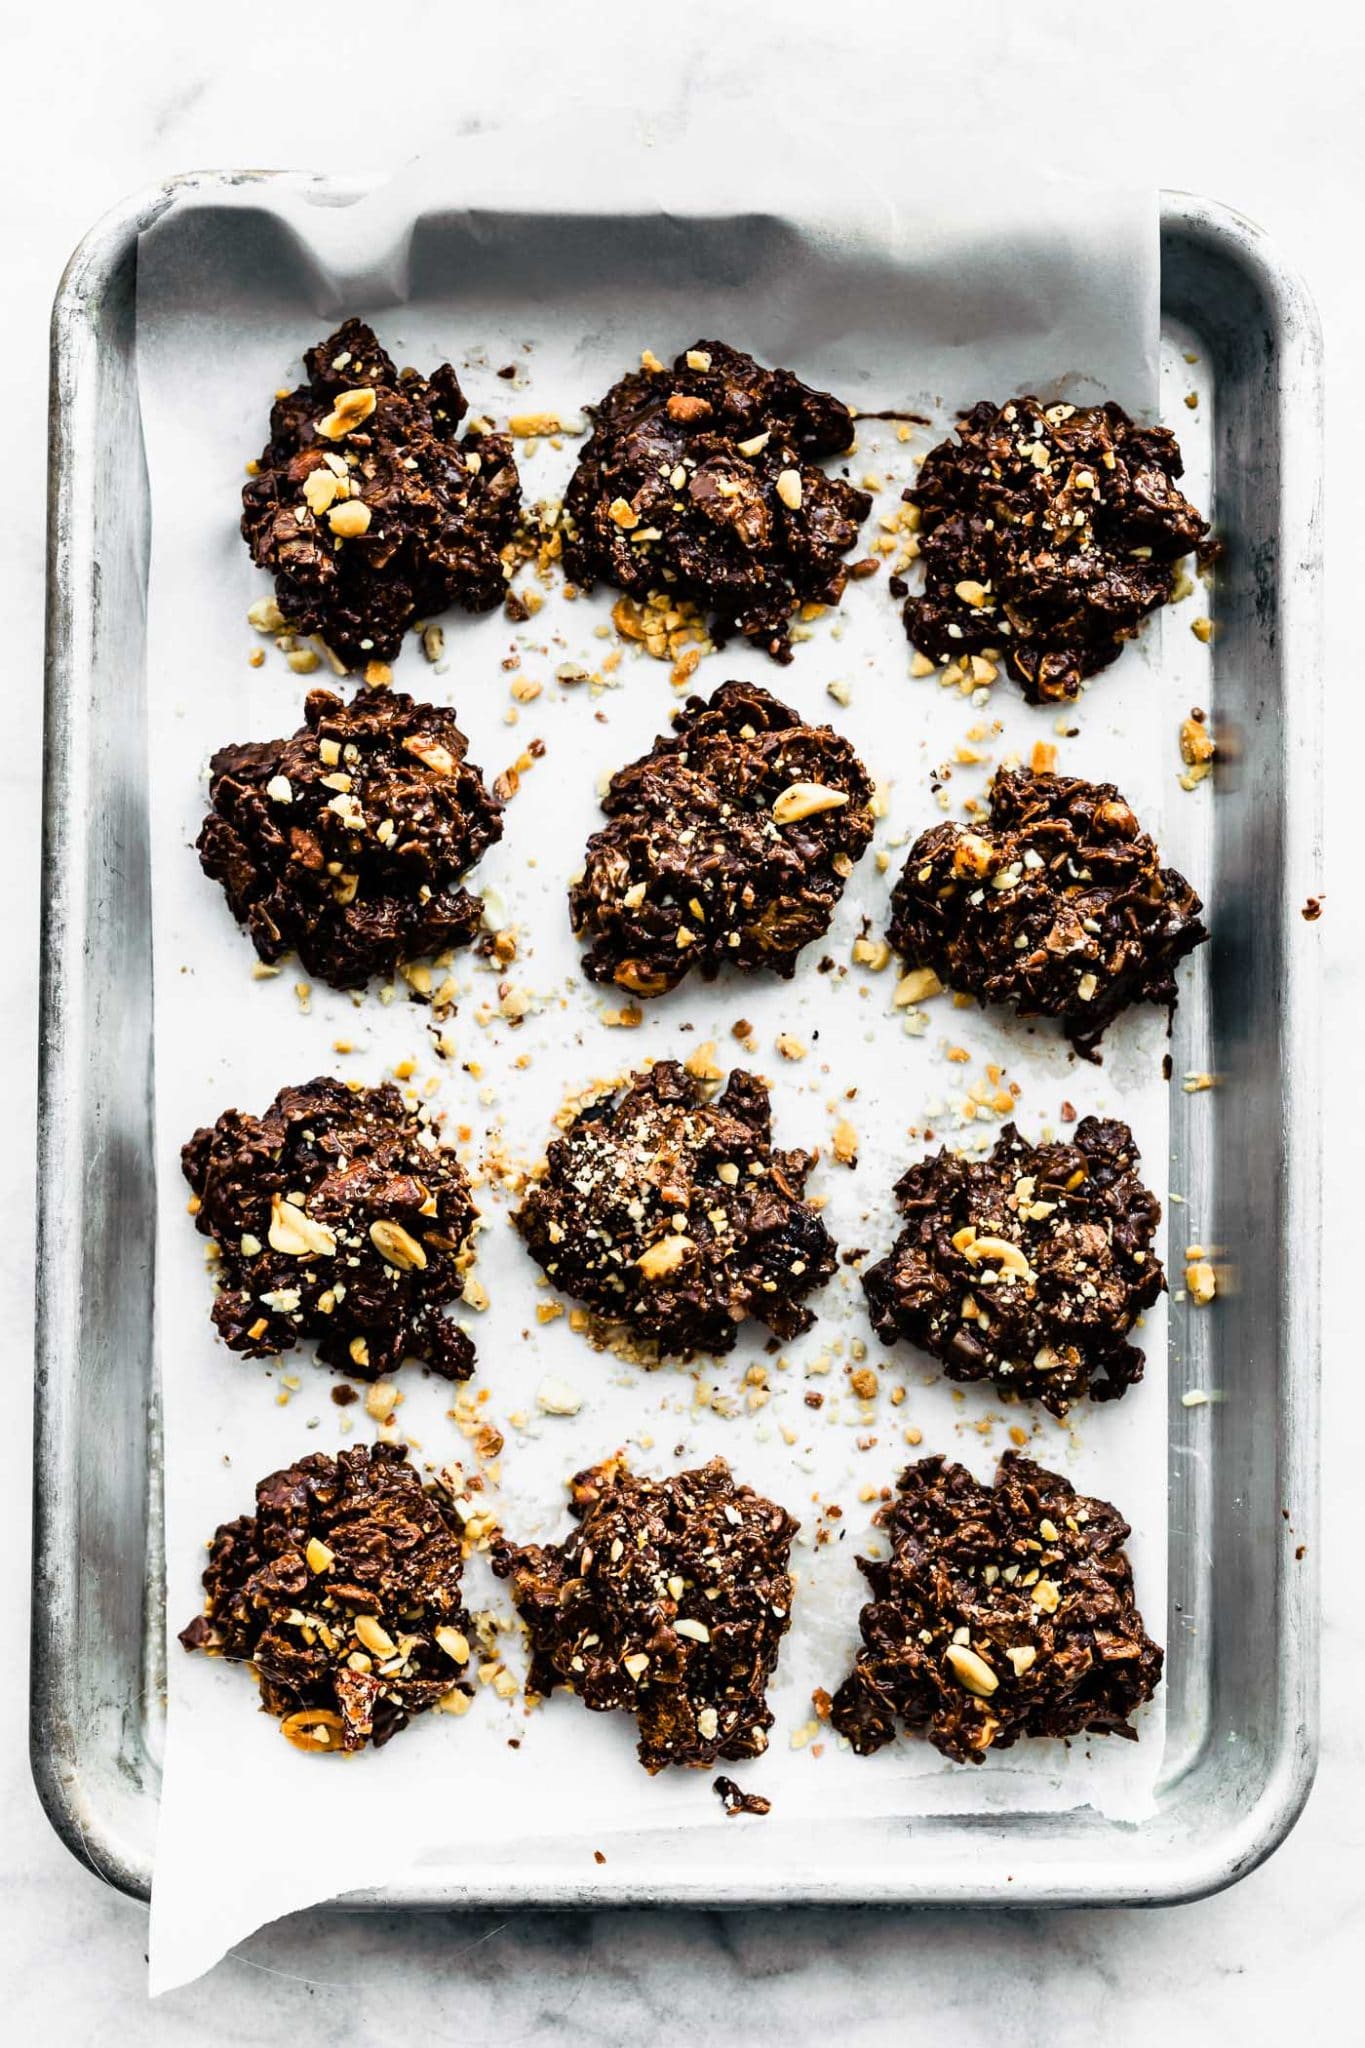 12 chocolate peanut butter cornflake cookies on a baking sheet topped with coocnut flakes, sea salt, and chopped nuts